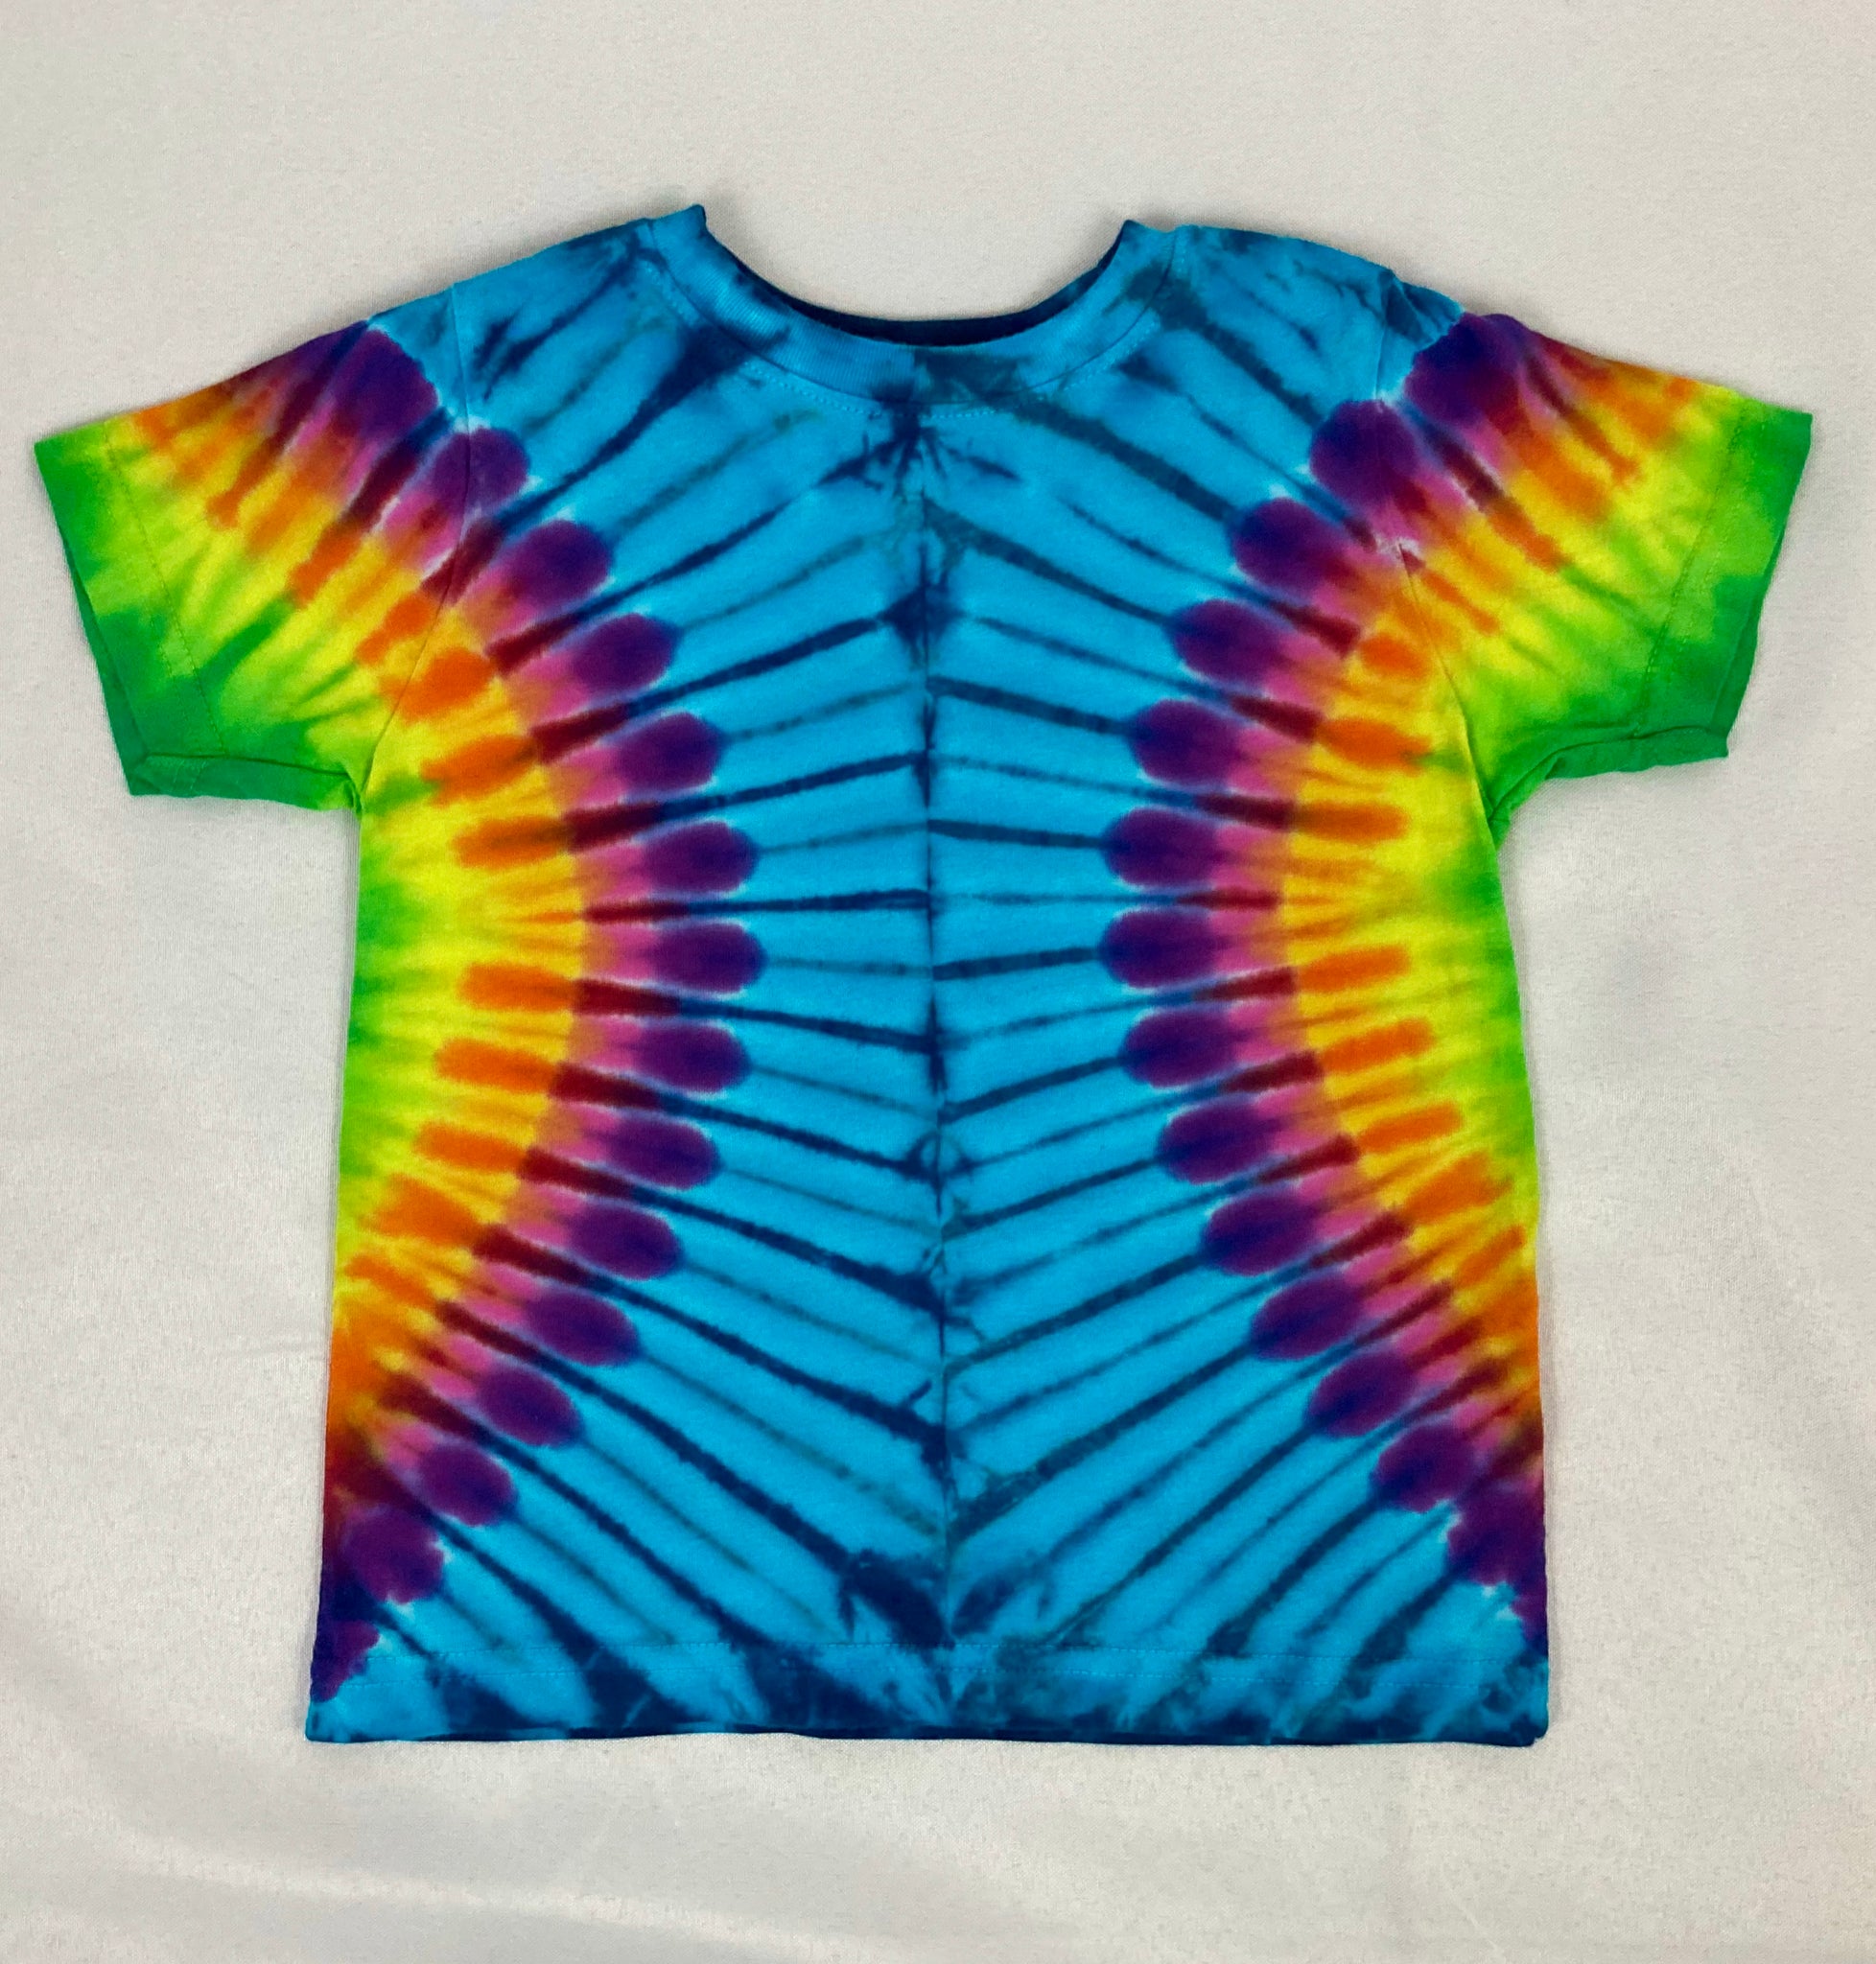 Toddler Blue/Rainbow Tie-Dyed Tee, 3T